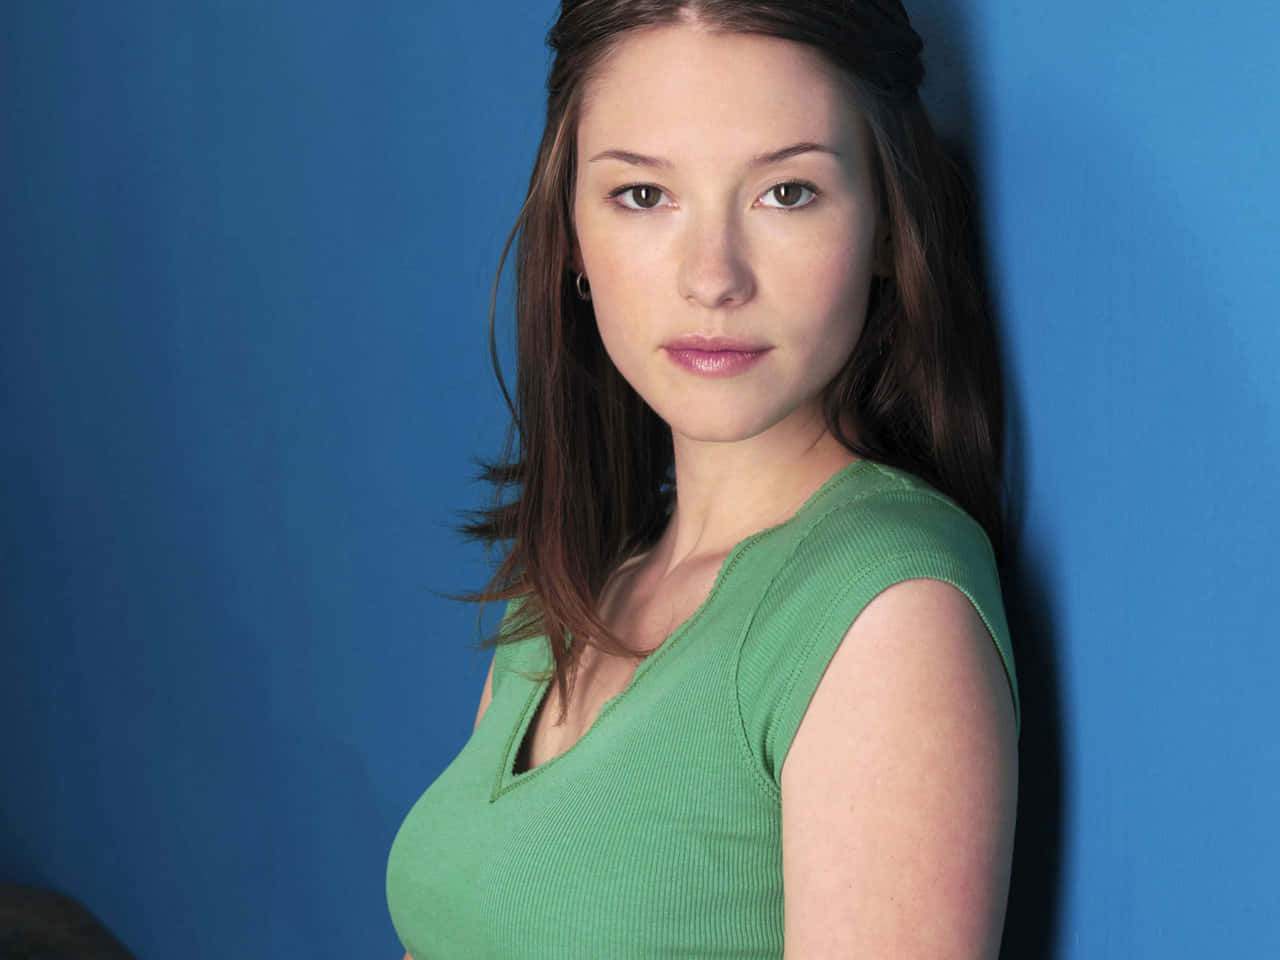 Chyler Leigh Posing in Chic Style Wallpaper